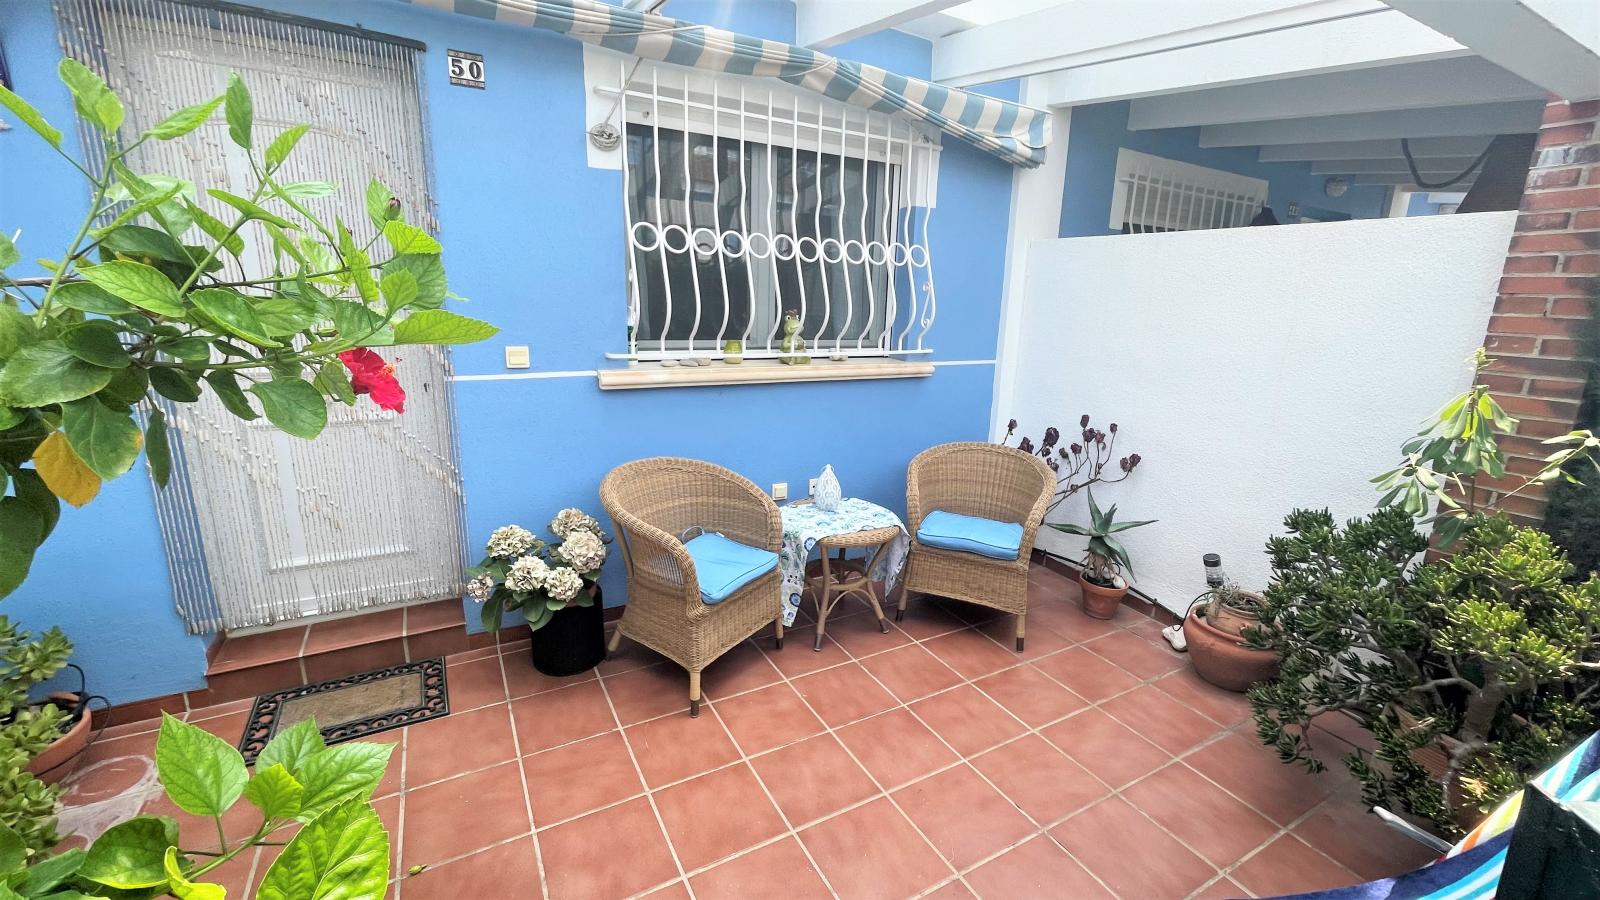 Beautiful, well-maintained terraced house 50 metres from the beach, own garage with access to the house, air conditioning, fireplace, patio, and much more!